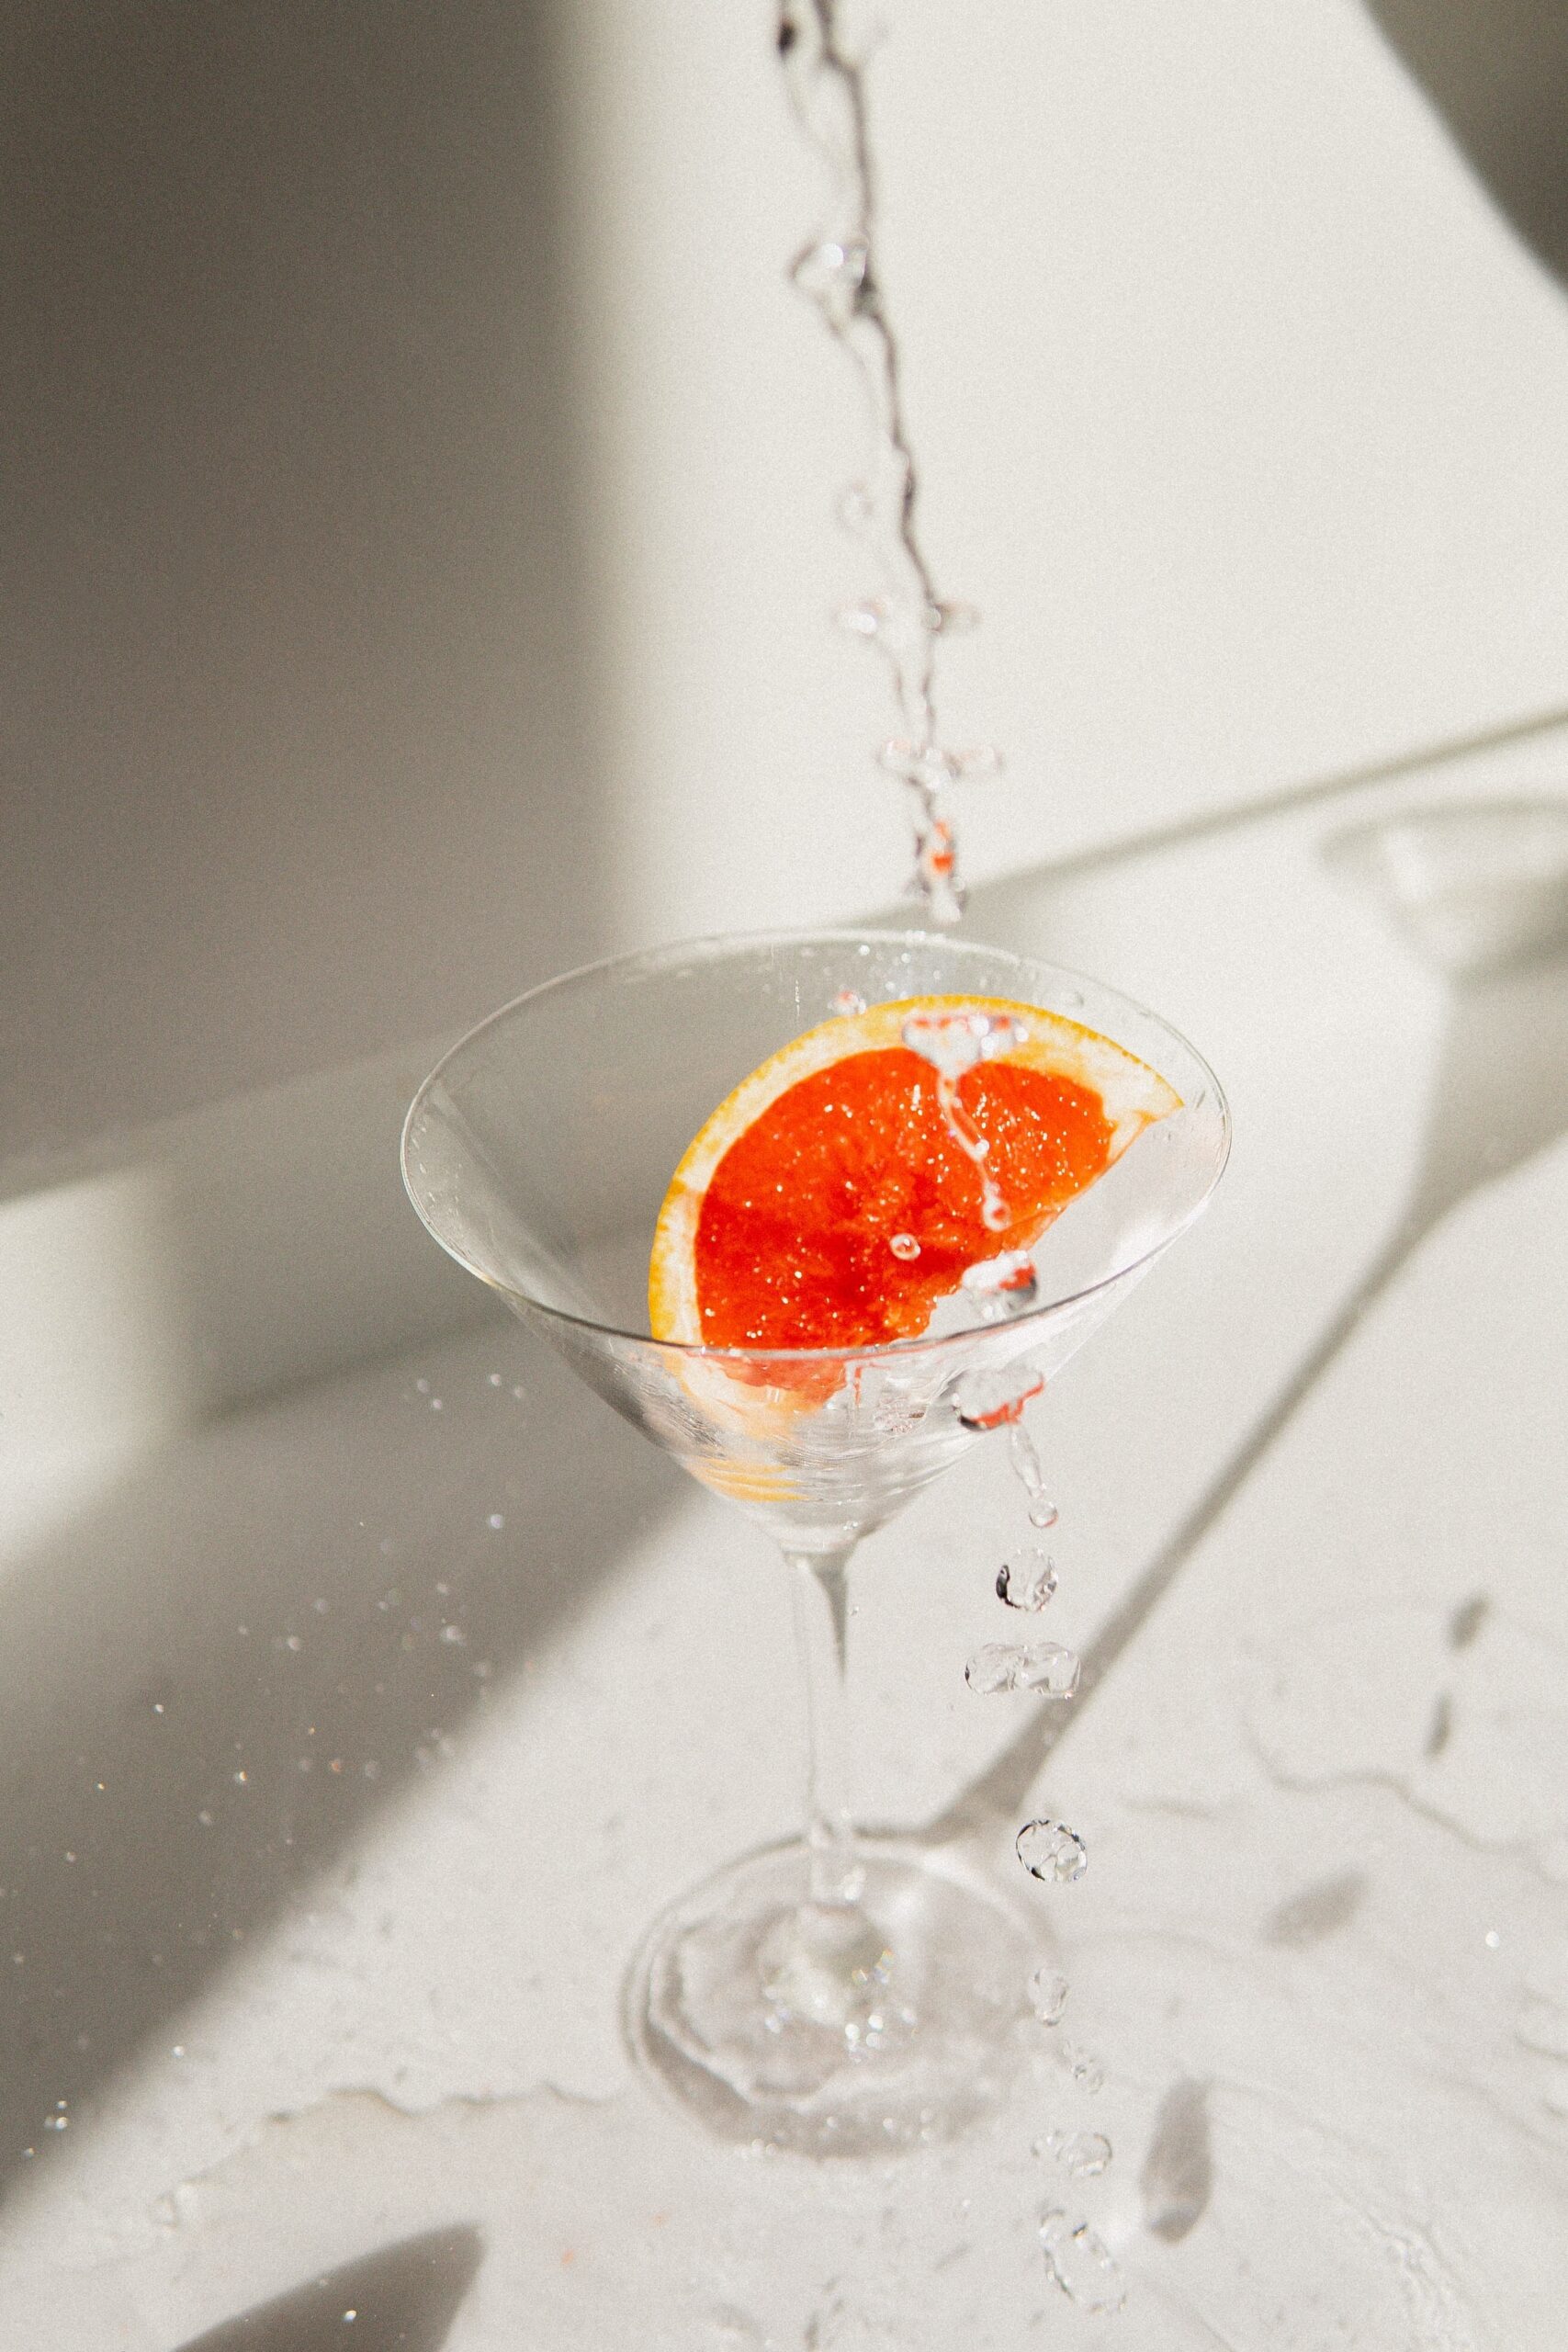 "Gin and Coconut Water Recipes: